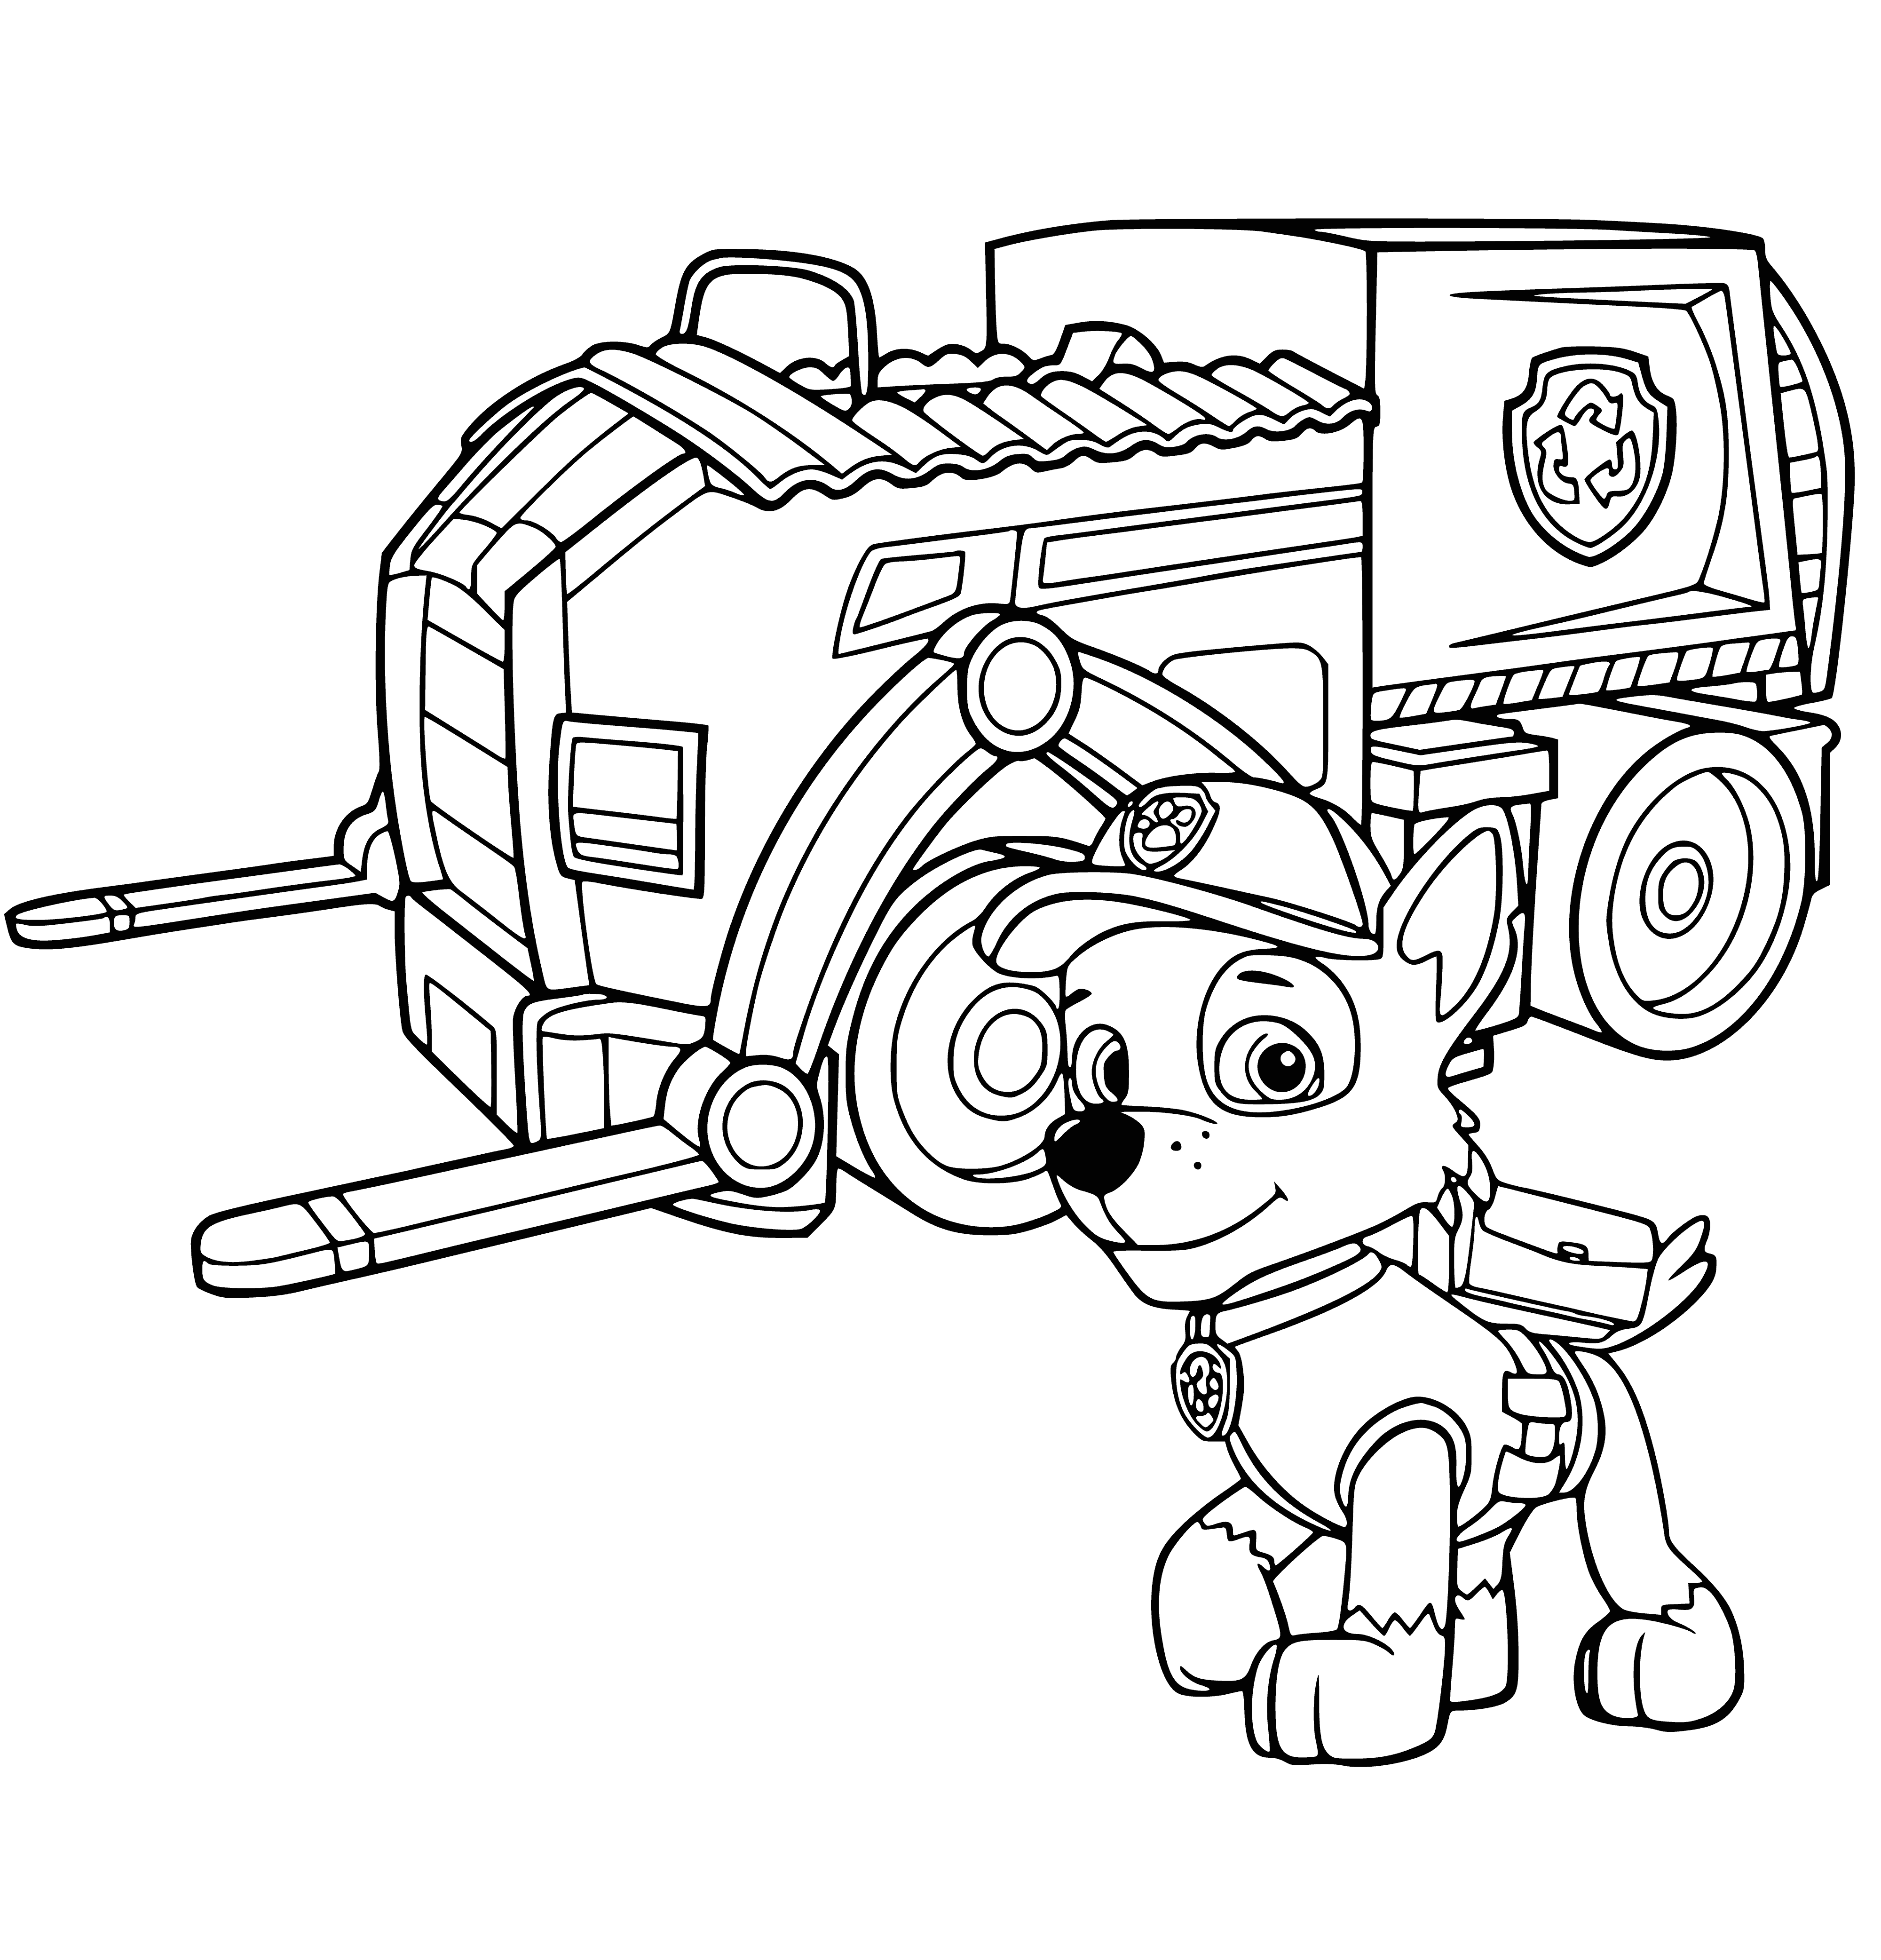 Rocky and the loader coloring page